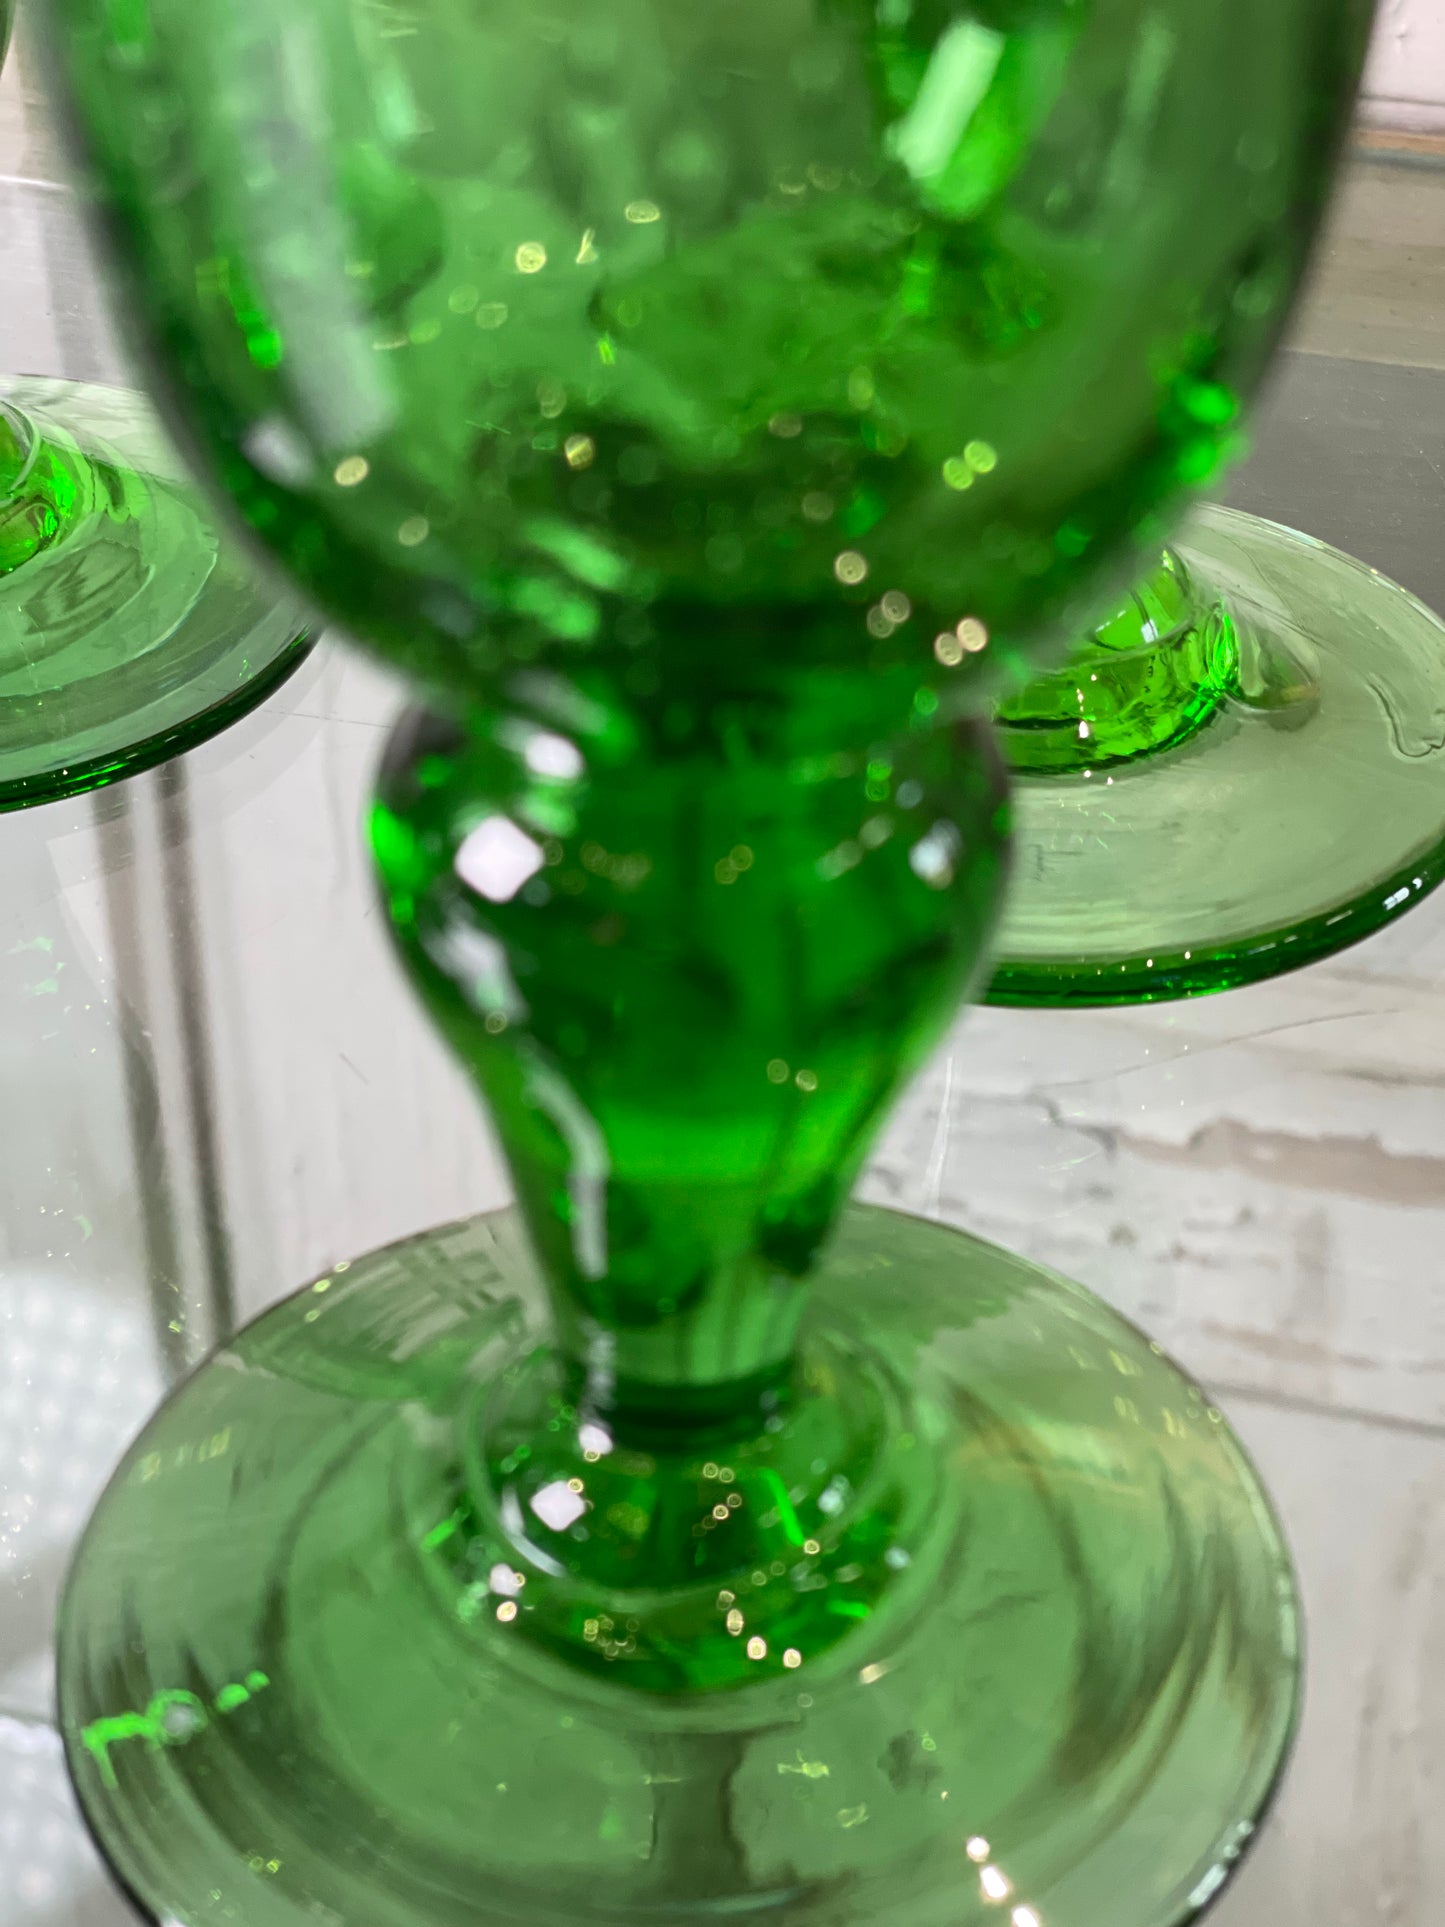 Large Green Wine Glass - The White Barn Antiques